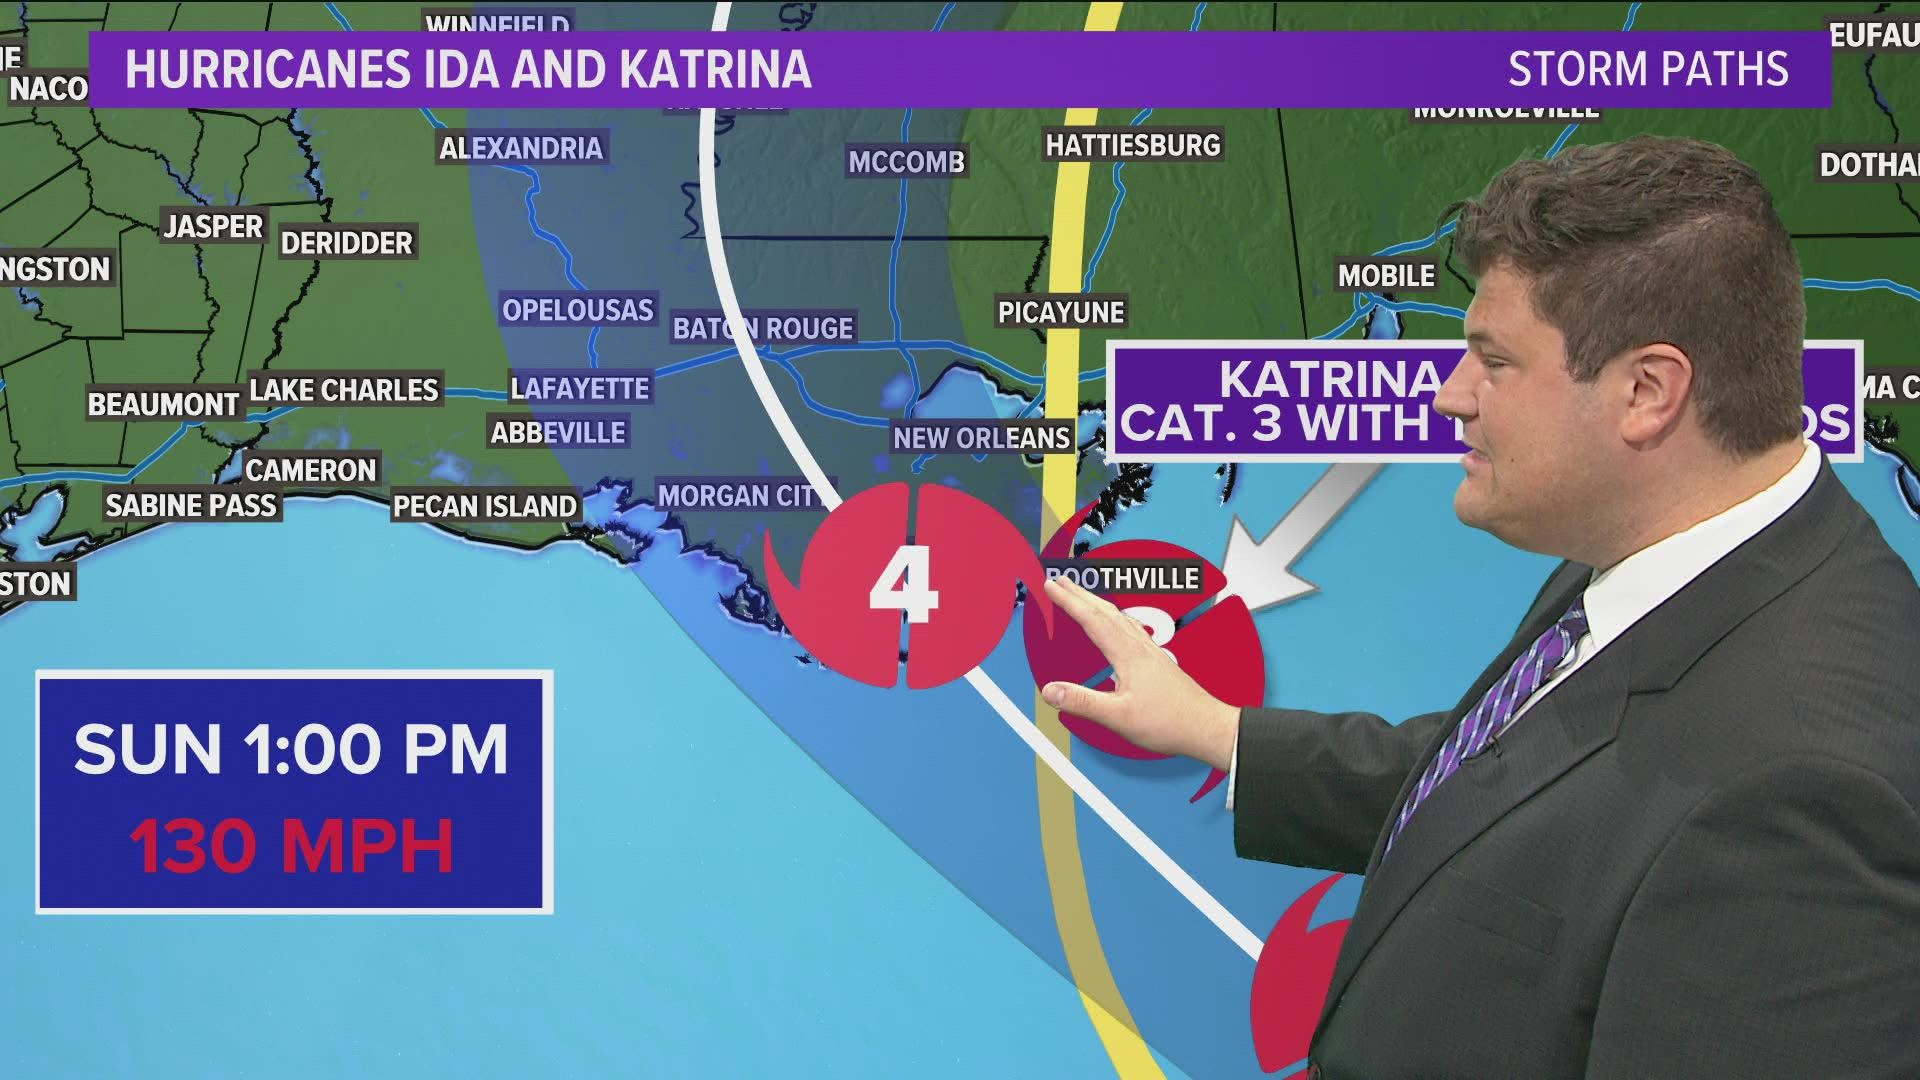 There are a lot of similarities between the two storms. WFAA meteorologist Jessie Hawila compares them.